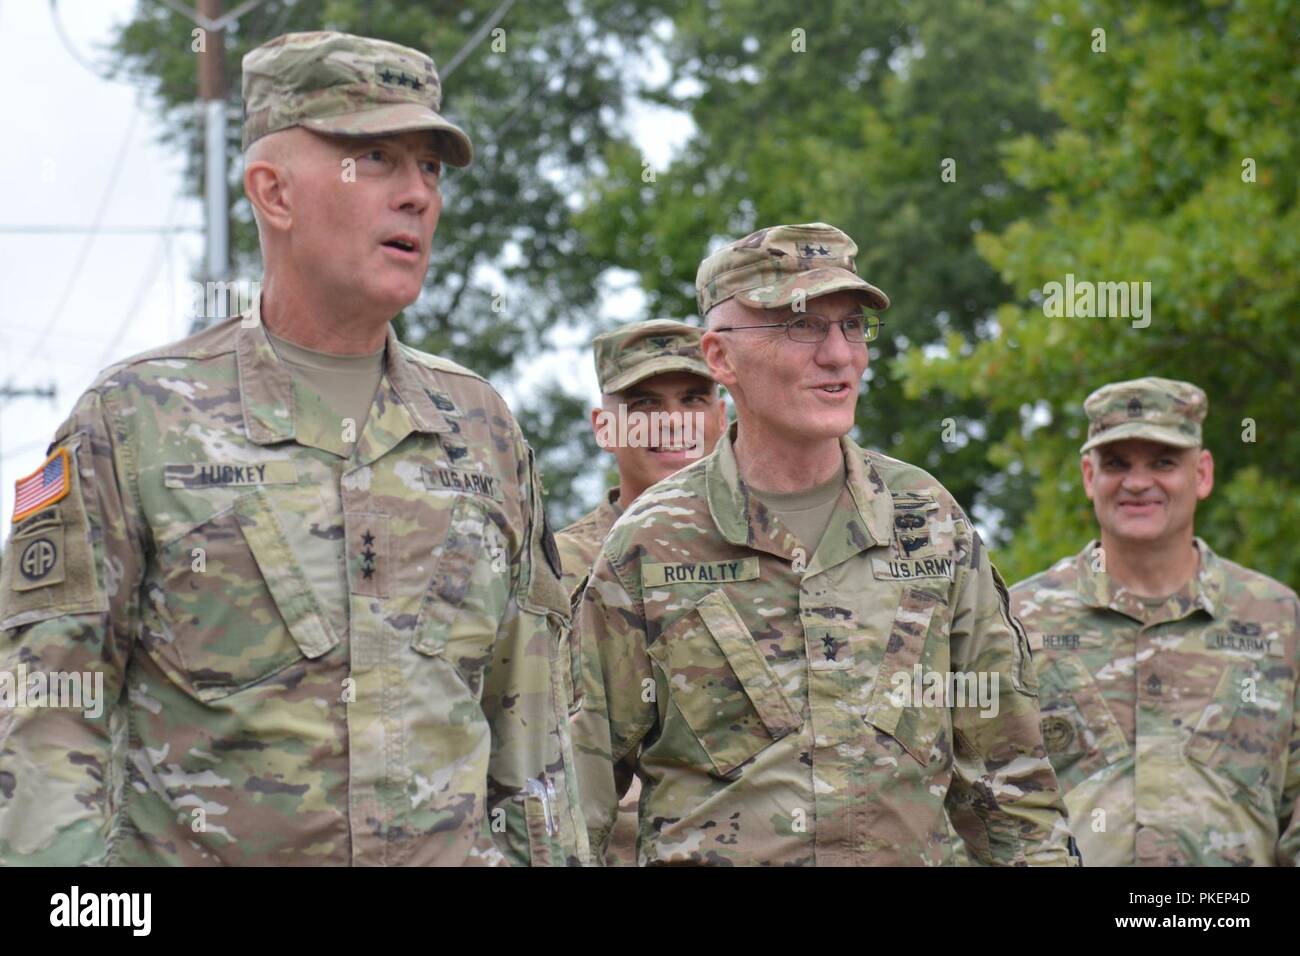 U.S. Army Reserve Maj. Gen. Ray Royalty, commanding general, 84th Training Command, greets LTG Charles D. Luckey, Chief of Army Reserve and Commanding General, U.S. Army Reserve Command, during his visit to Task Force Ultimate, Operation Cold Steel II, hosted by U.S. Army Civil Affairs and Psychological Operations Command (Airborne), July 25, 2018 at Joint Base McGuire-Dix-Lakehurst, N.J. Operation Cold Steel is the U.S. Army Reserve's crew-served weapons qualification and validation exercise to ensure America's Army Reserve units and Soldiers are trained and ready to deploy on short notice as Stock Photo